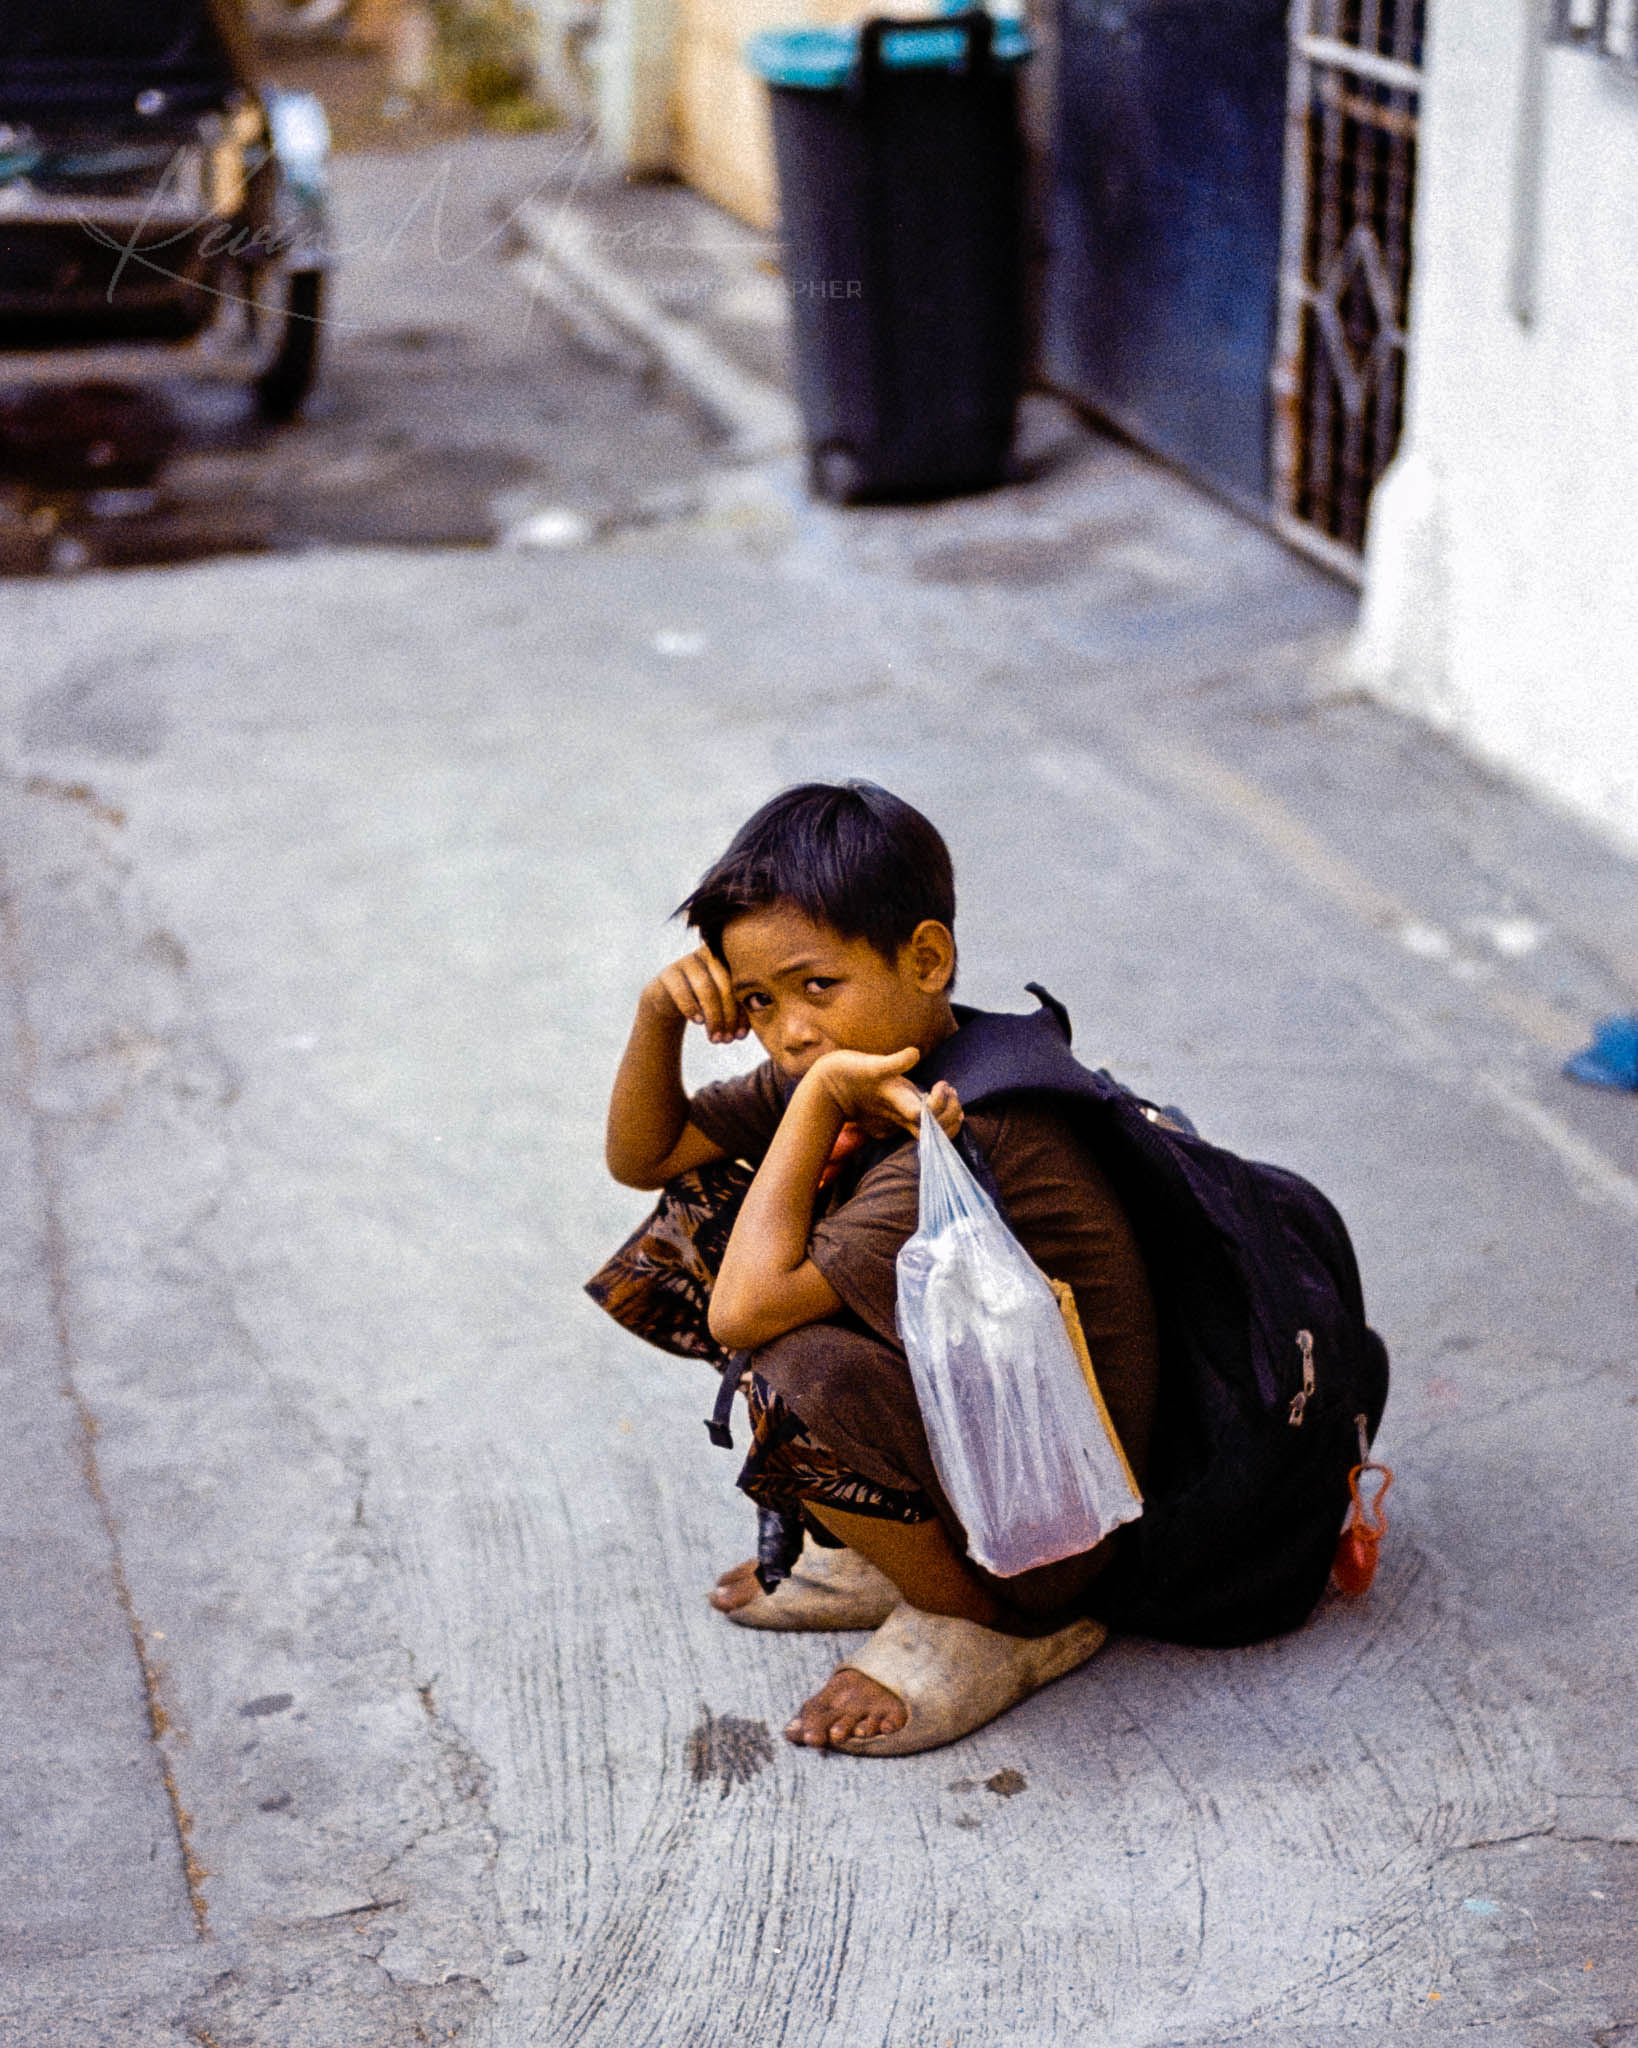 Young boy reflecting on urban street, holding plastic bag, under warm afternoon light.